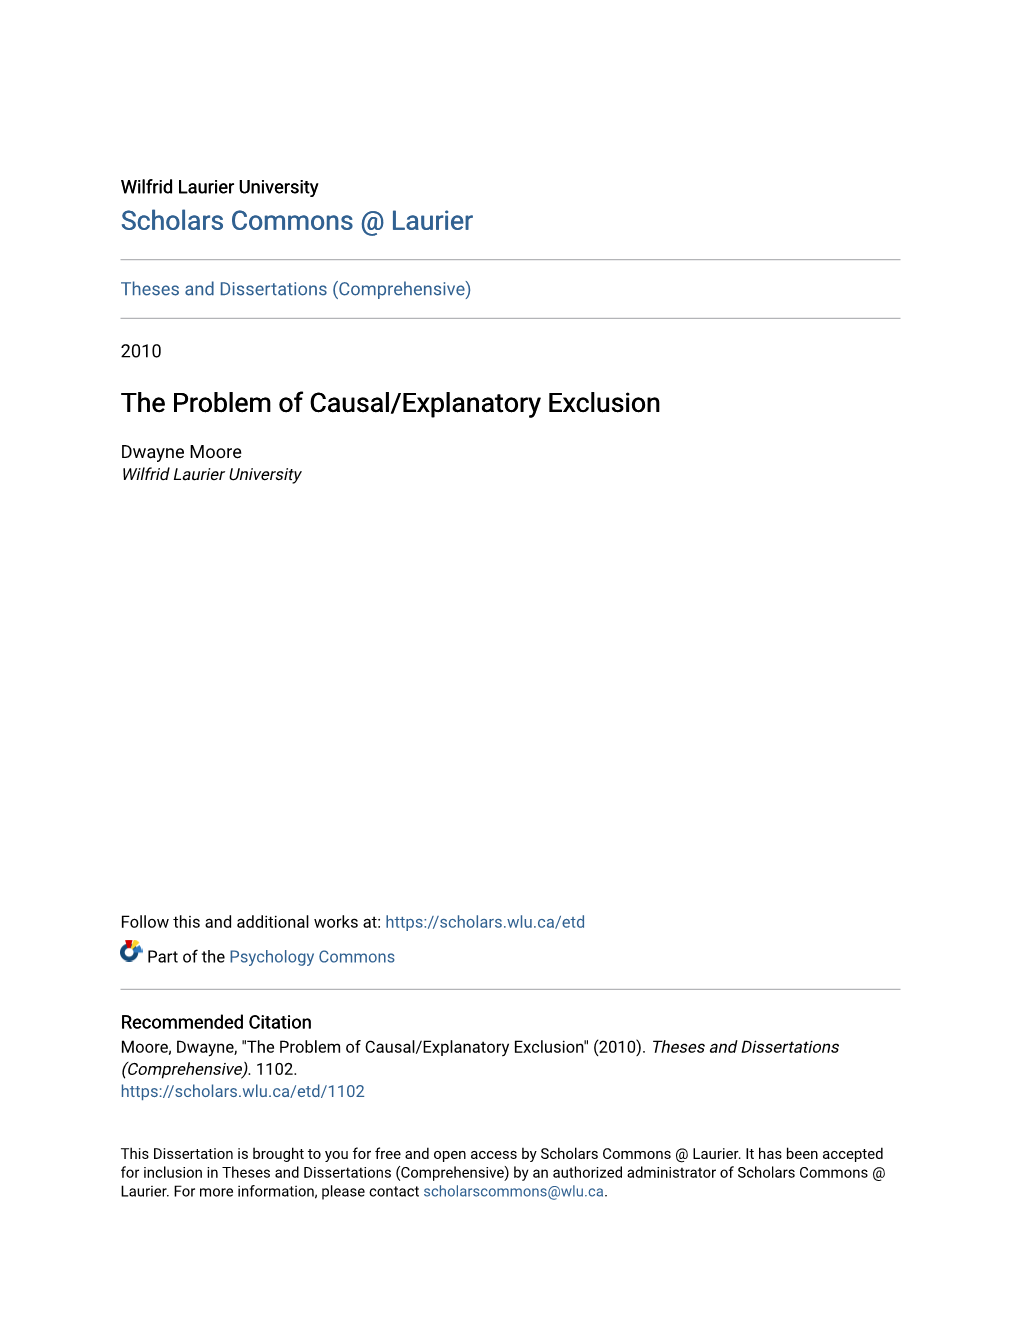 The Problem of Causal/Explanatory Exclusion